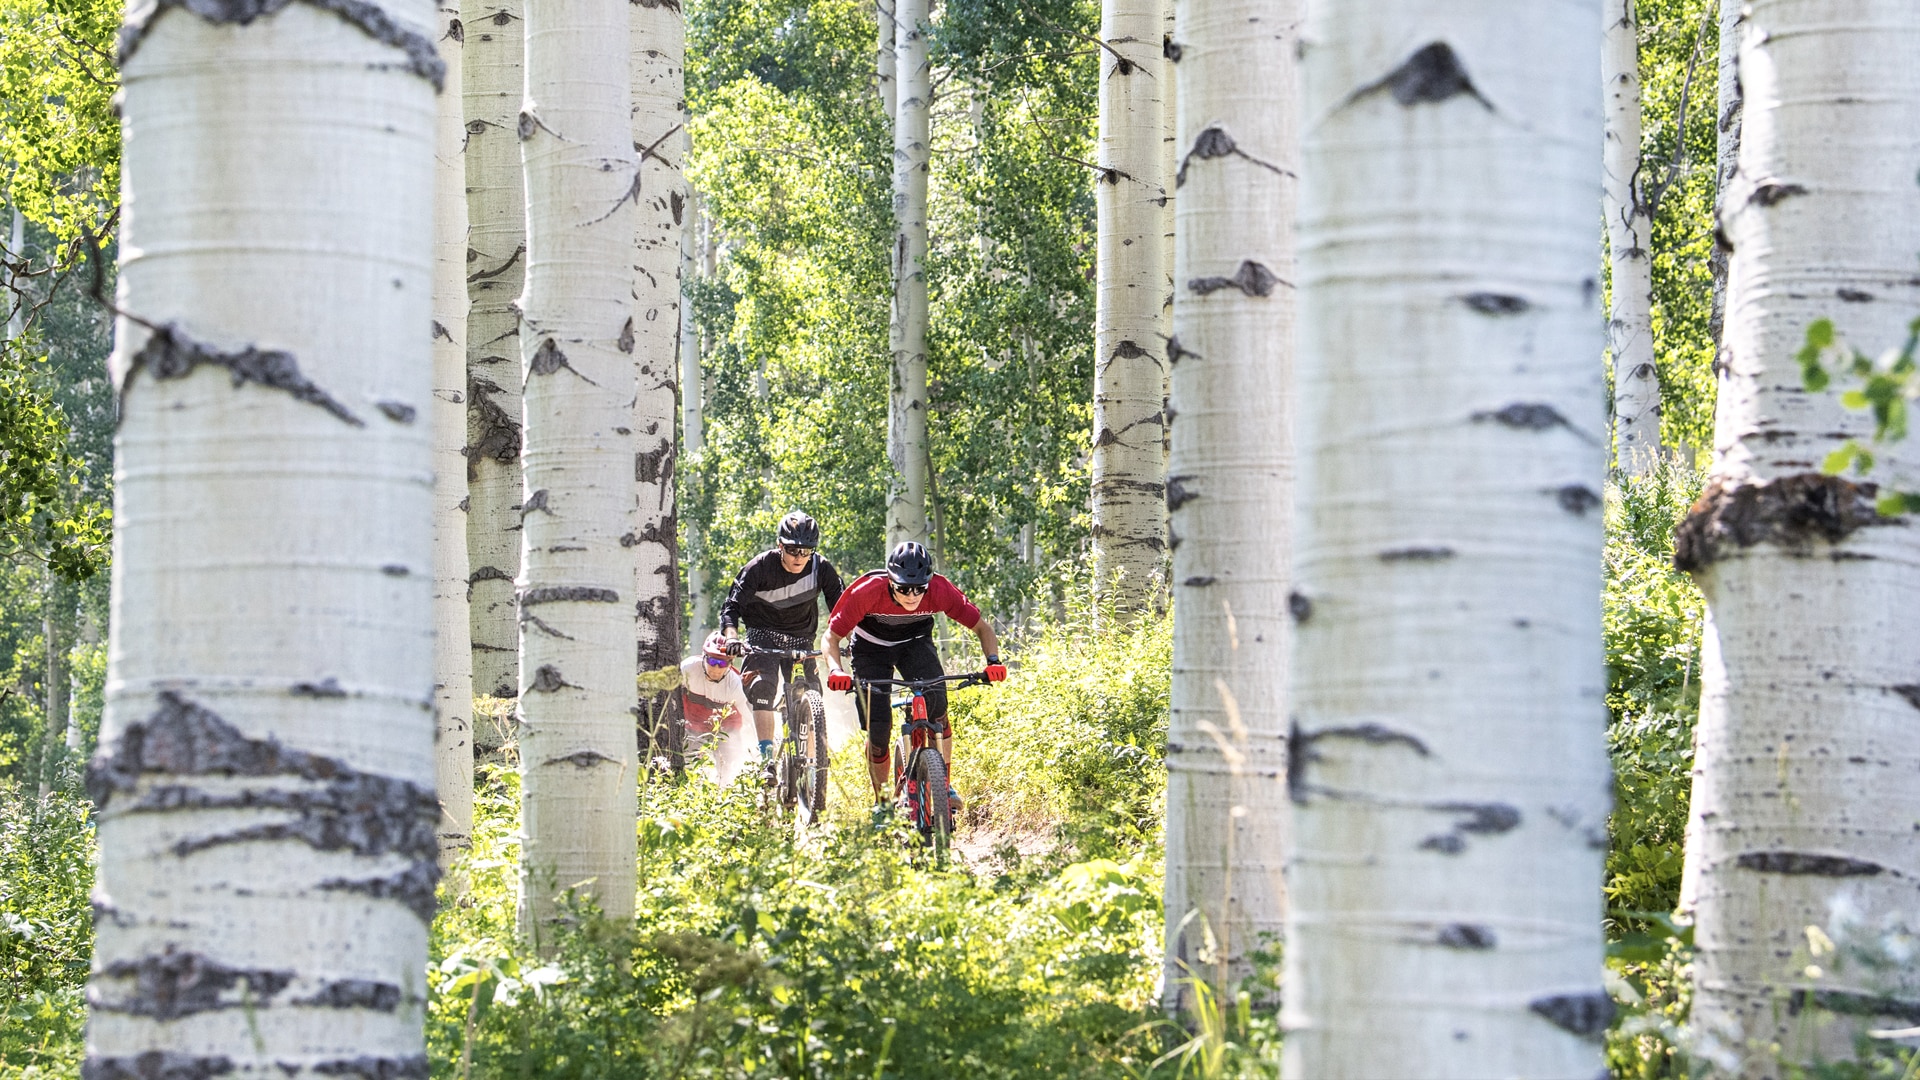 A group of mountain bikers ride through a forest of aspen trees.